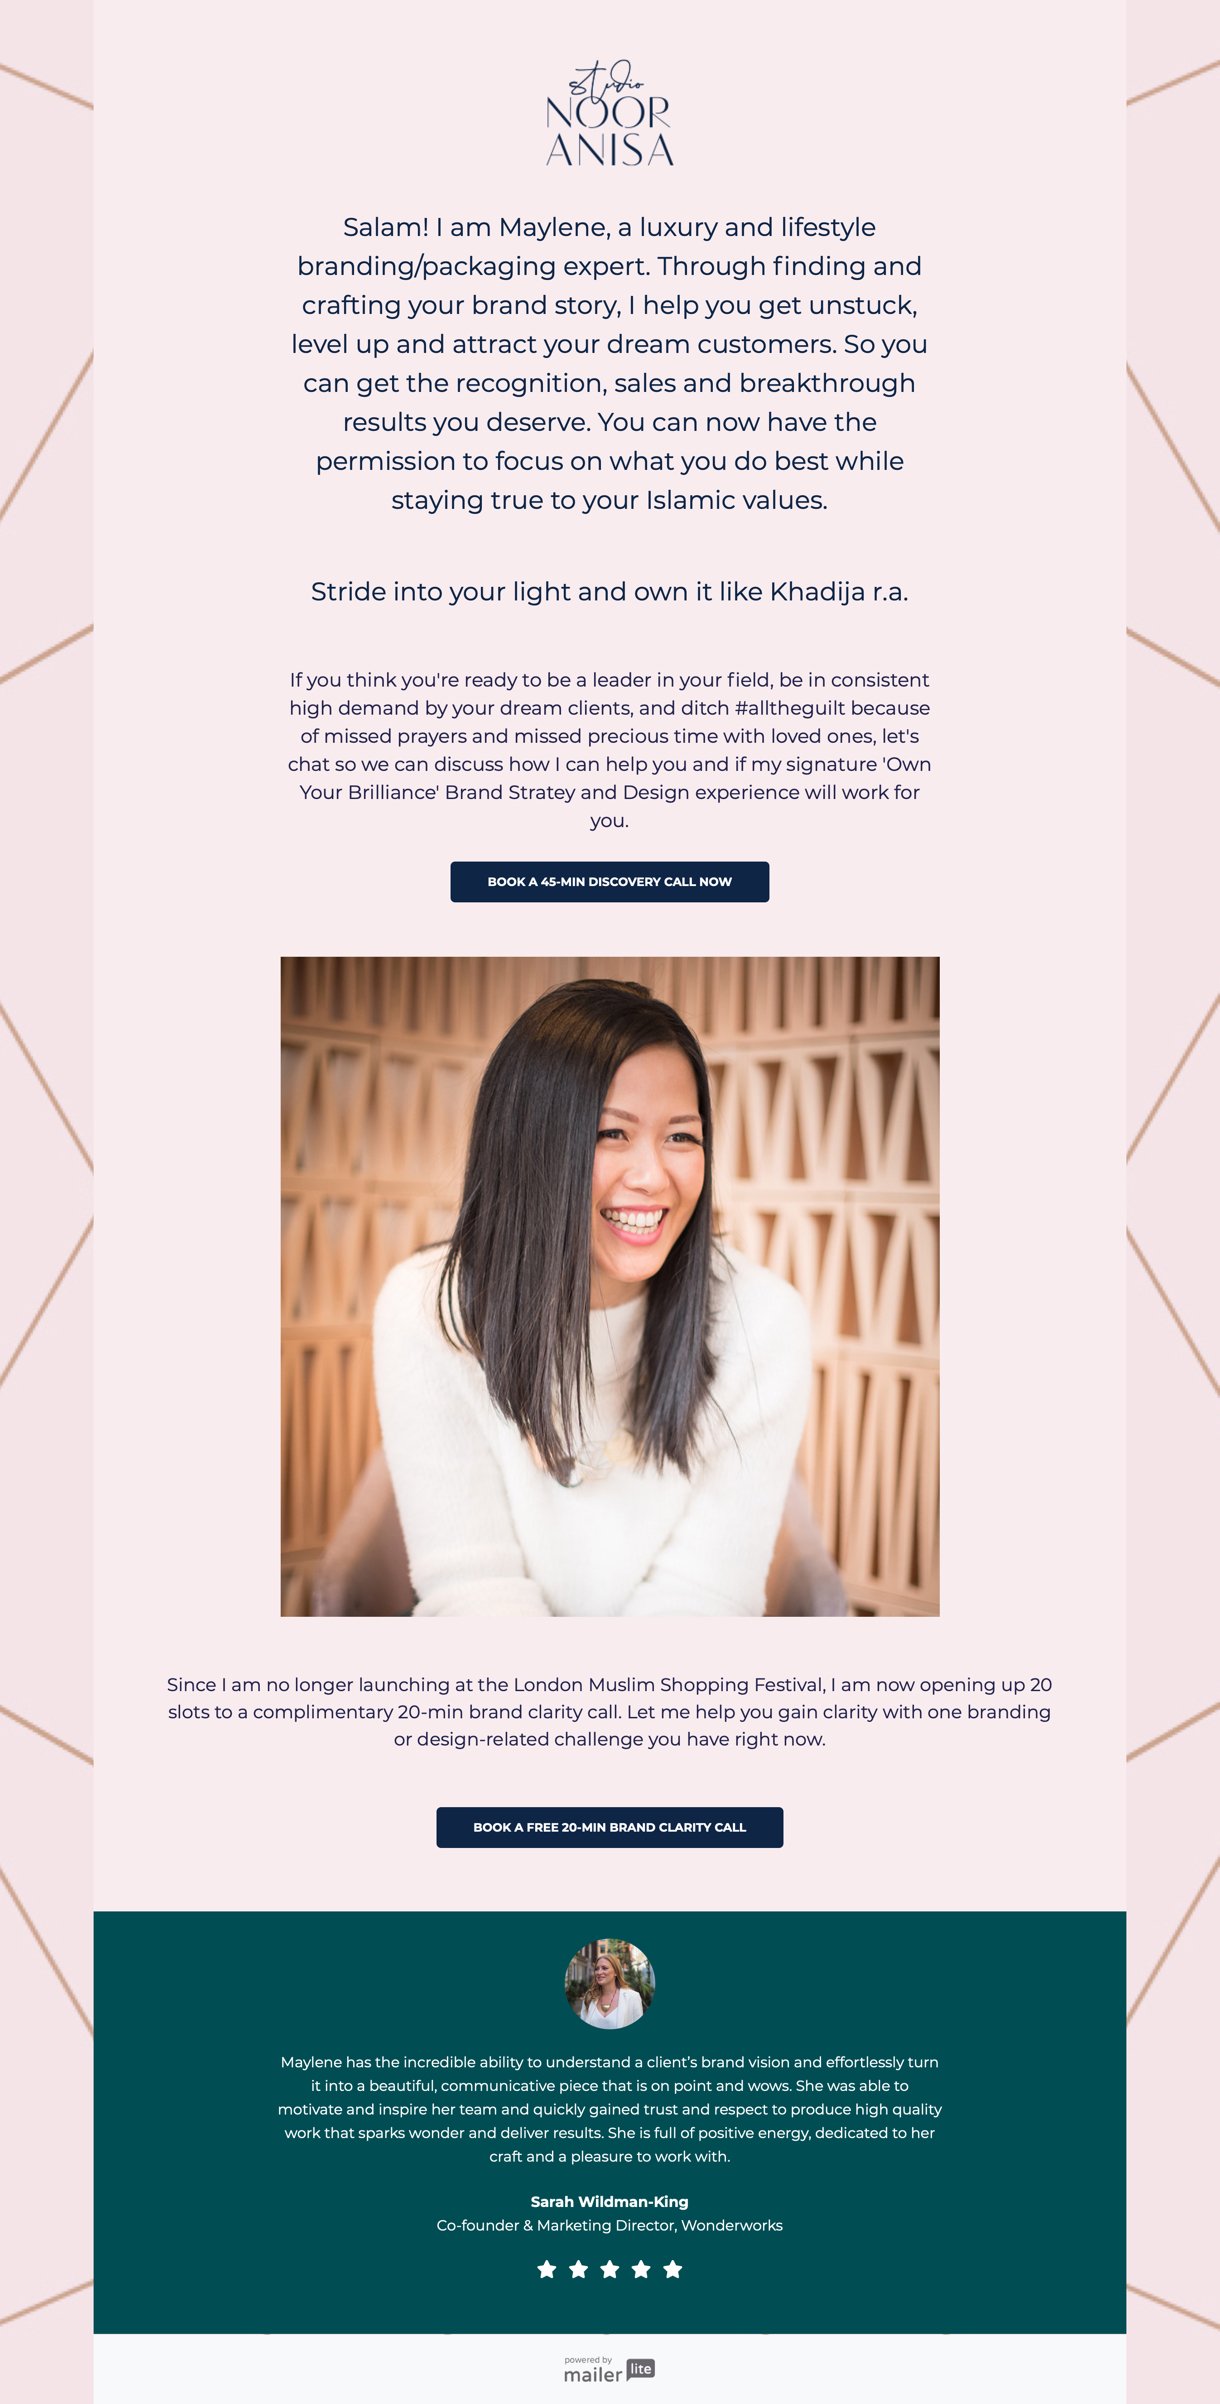 Studio Noor Anisa book discovery call landing page examples rose background